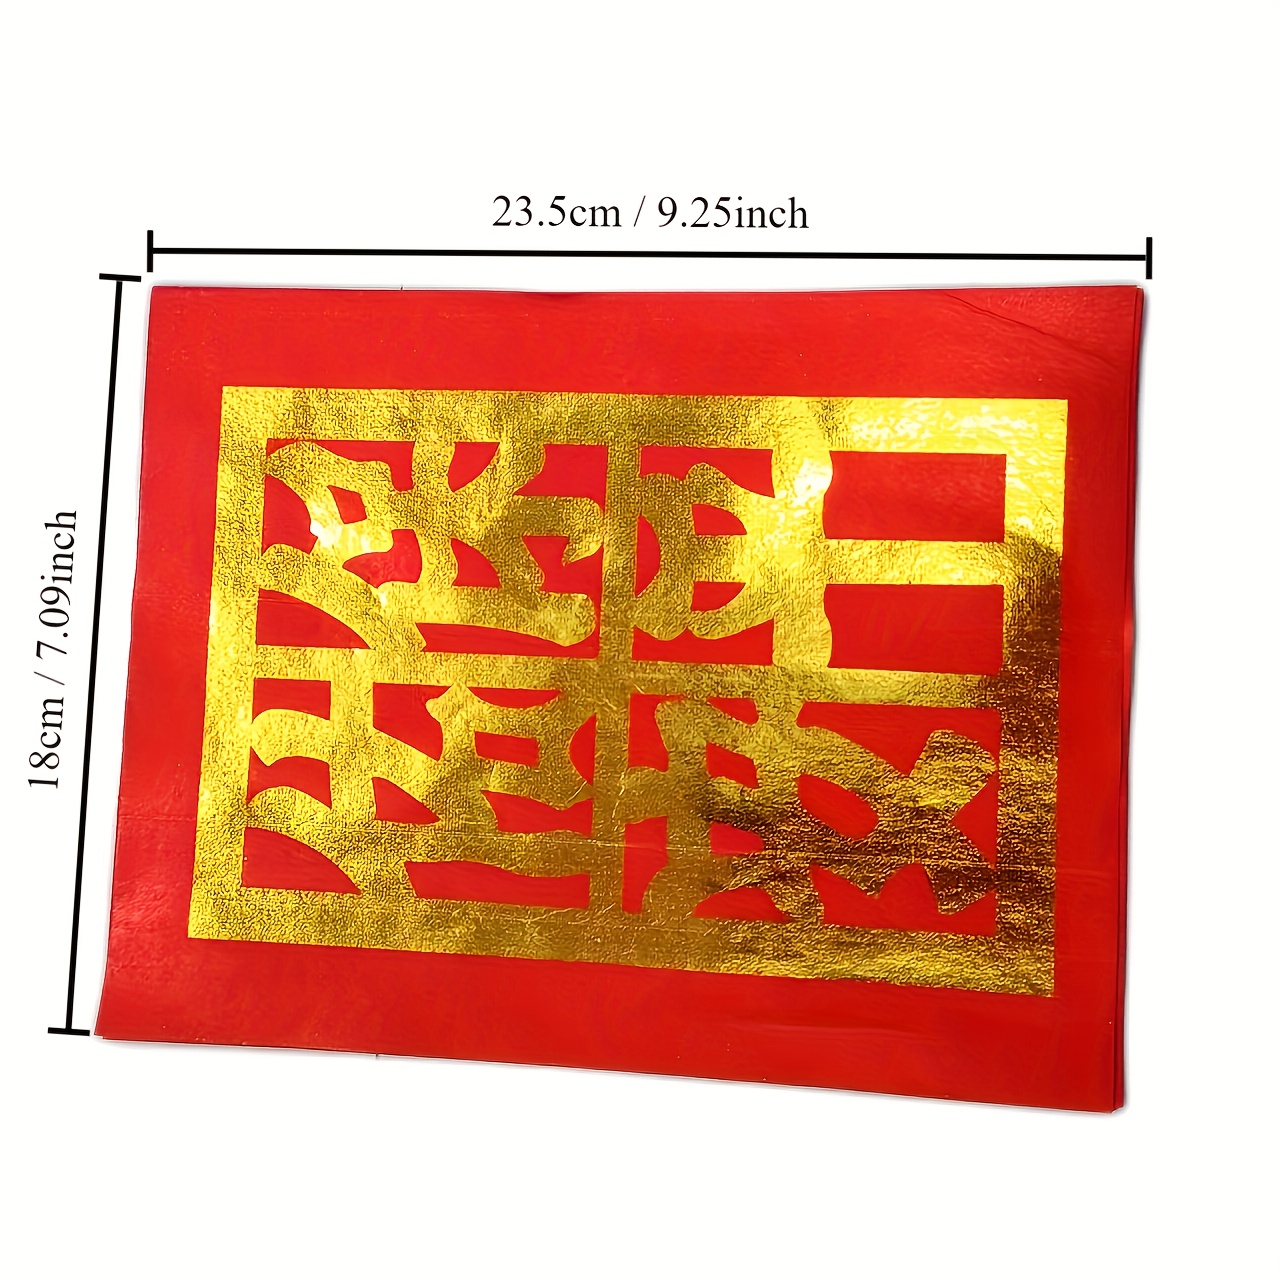 100pcs Chinese Joss Paper Money, Ancestor Money,Worshiping Ancestor, Come  Into A Good Fortune